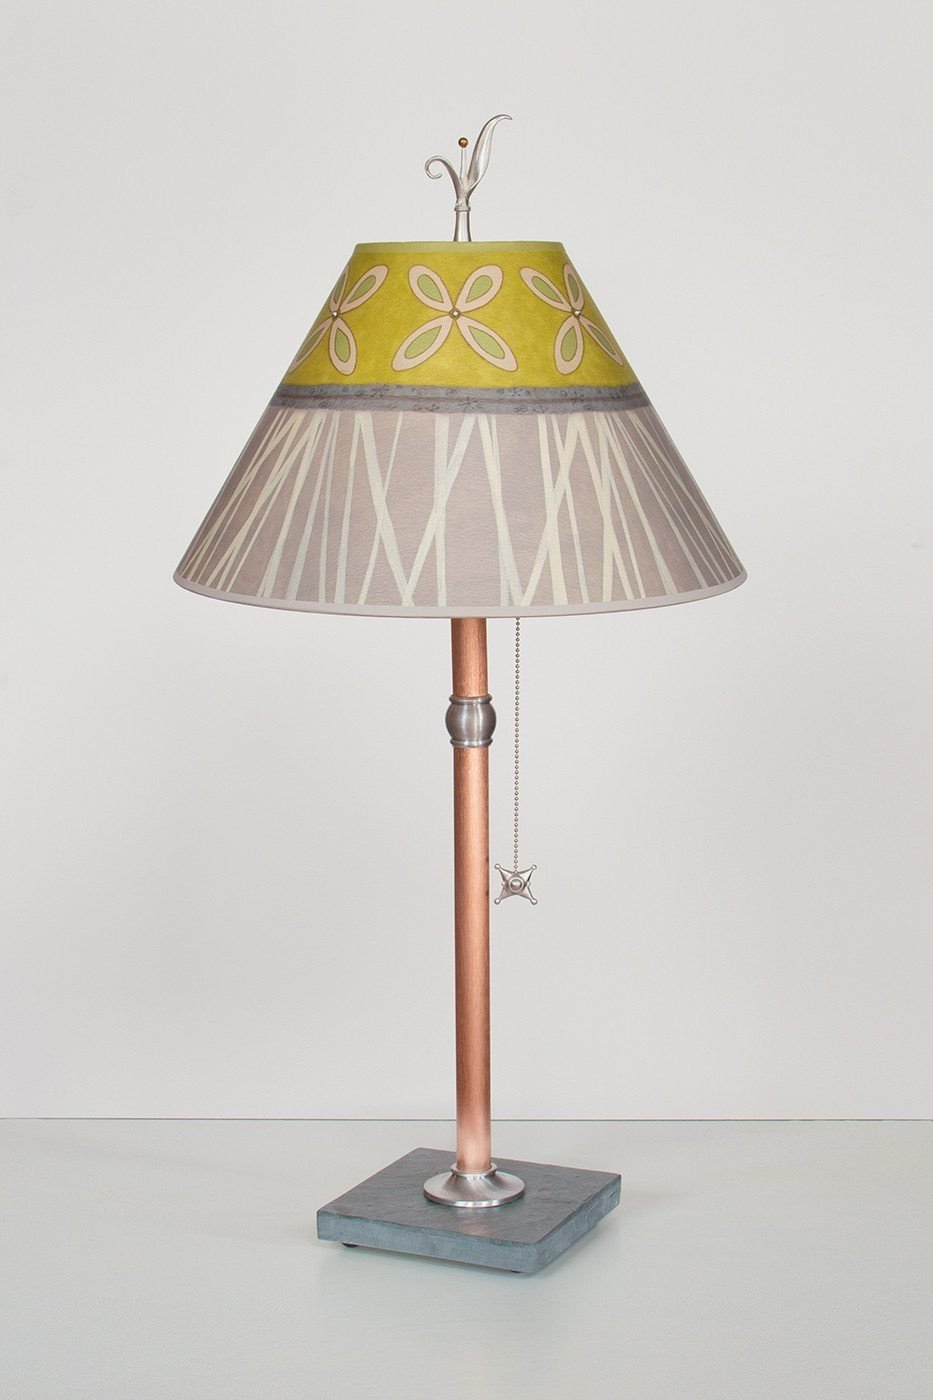 Copper Table Lamp with Medium Conical Shade in Kiwi - Lit